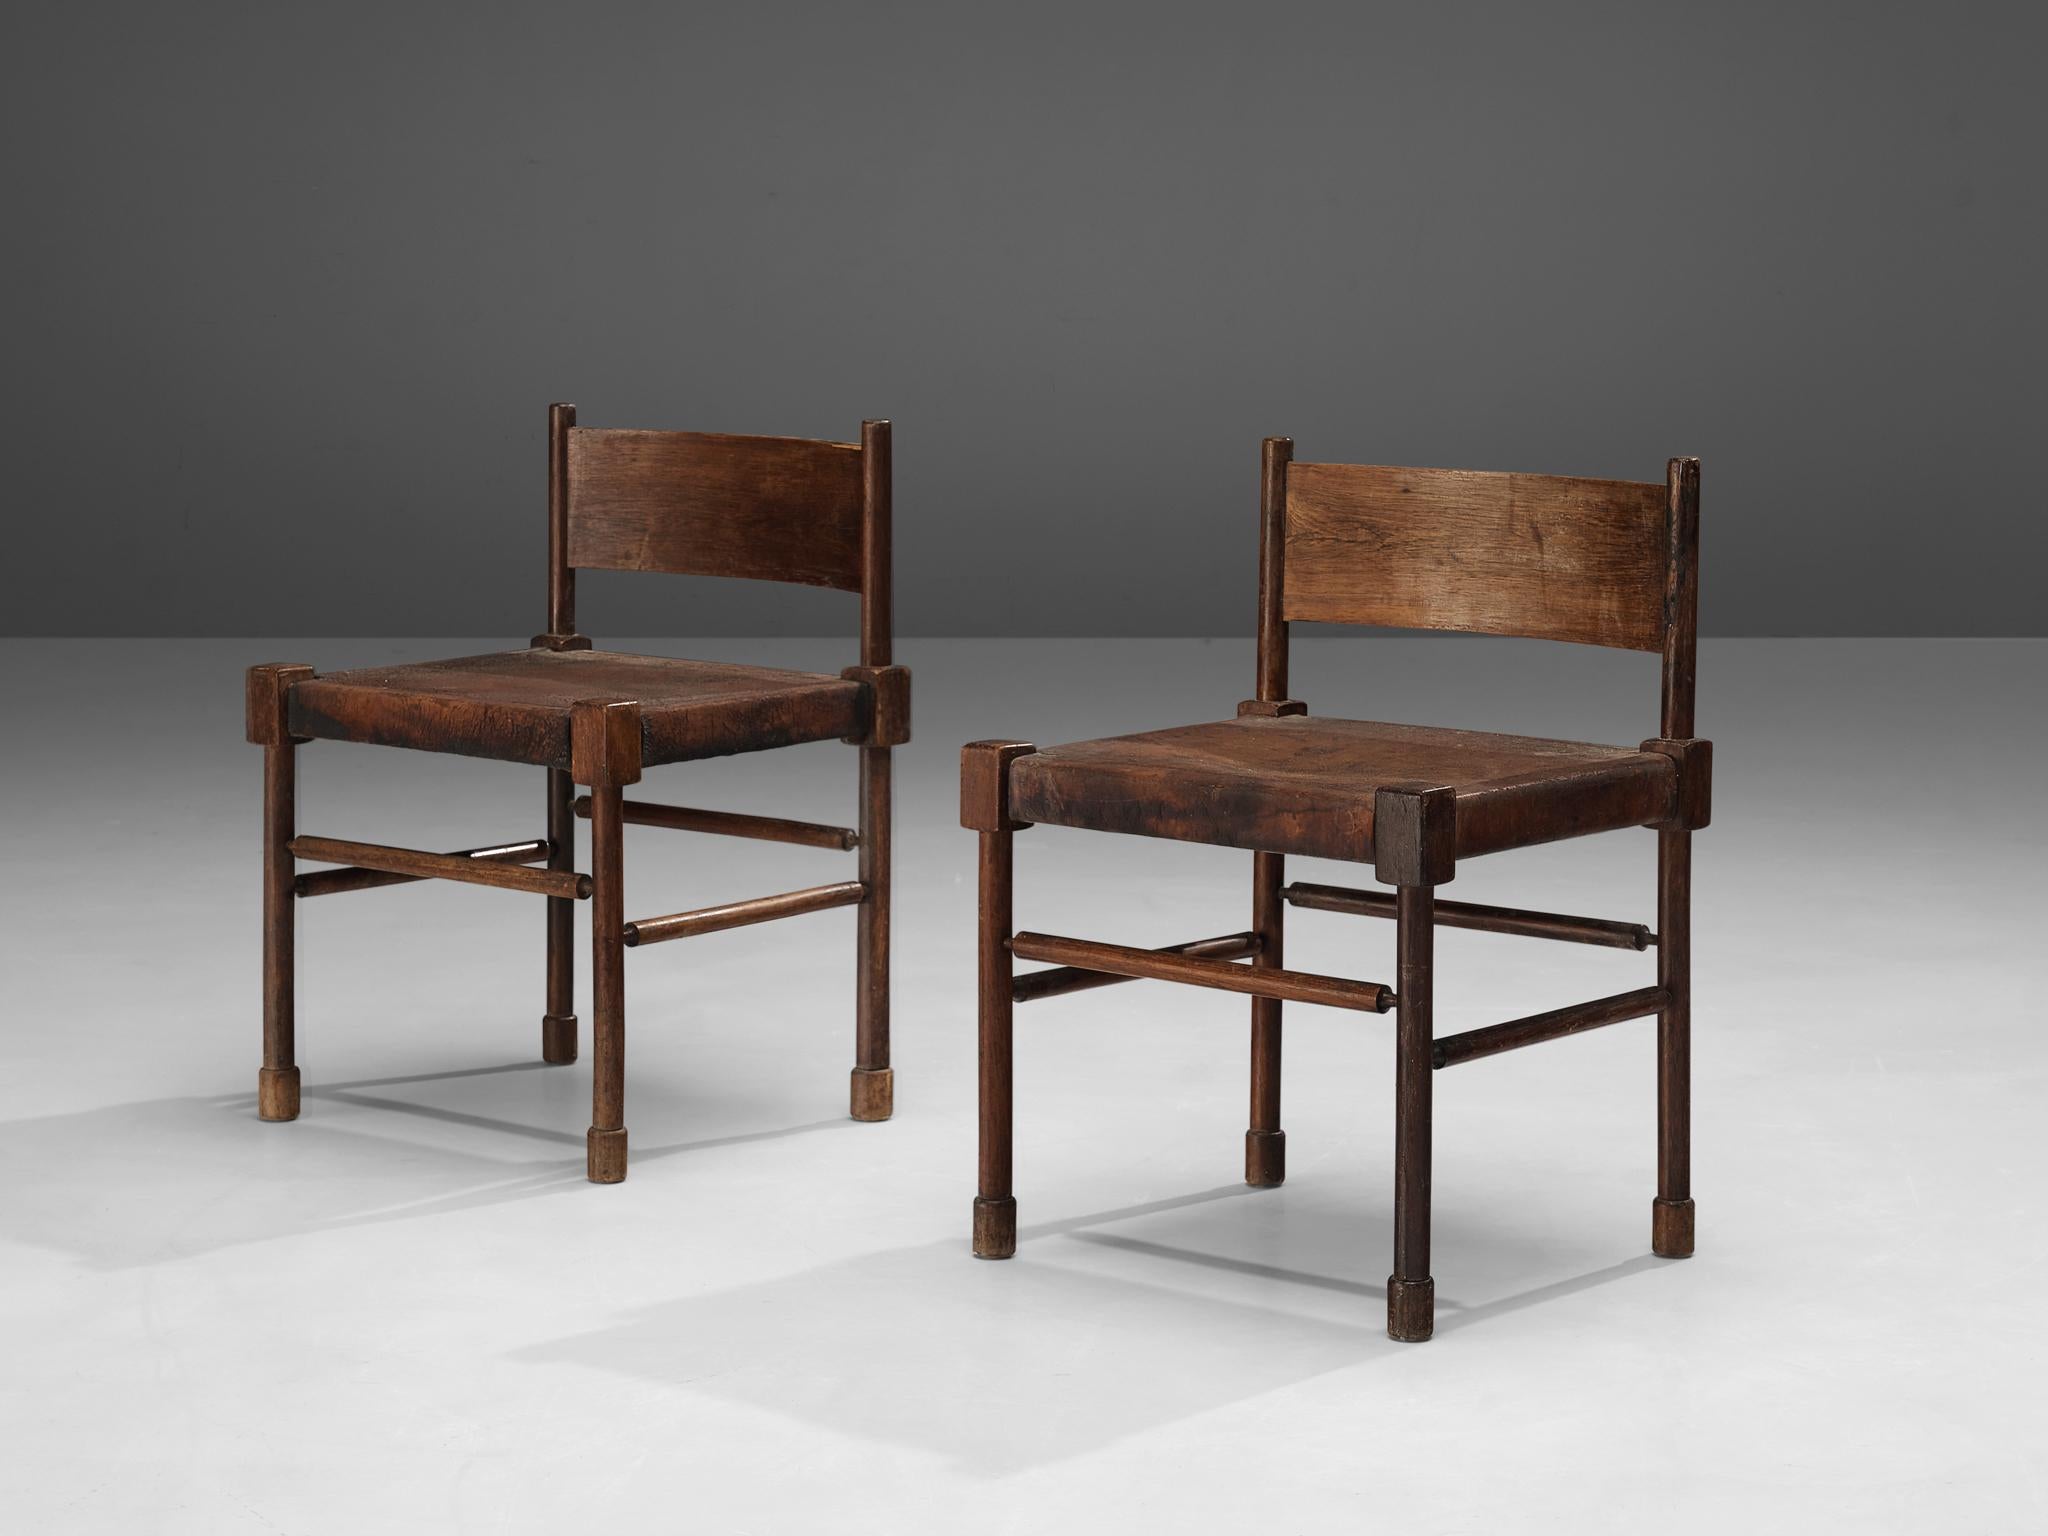 Side chairs, stained wood, patinated leather, Europe, 1940s

Rare side chairs with sculpted frame in stained wood and leather seats. What makes this design so unique is the way the designer played with proportions and shapes. The detailed carved